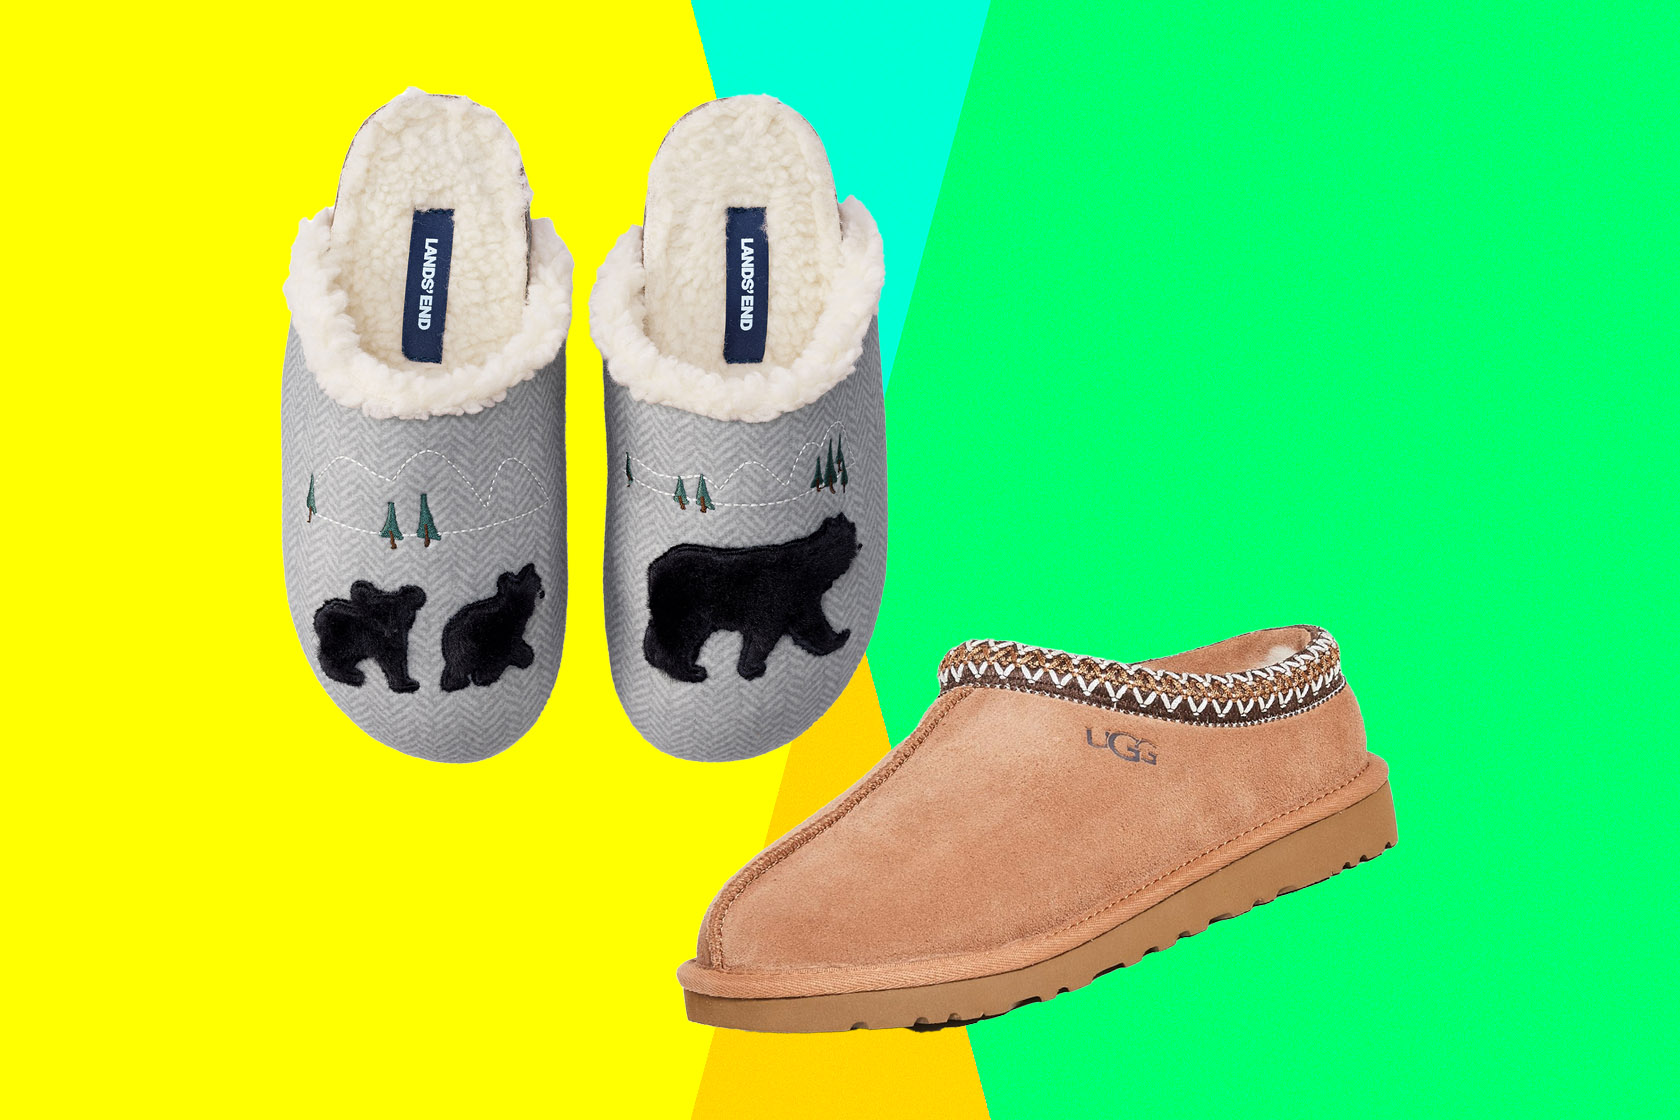 Grab the Dearfoams Warm Up Bootie Slippers while they're on sale